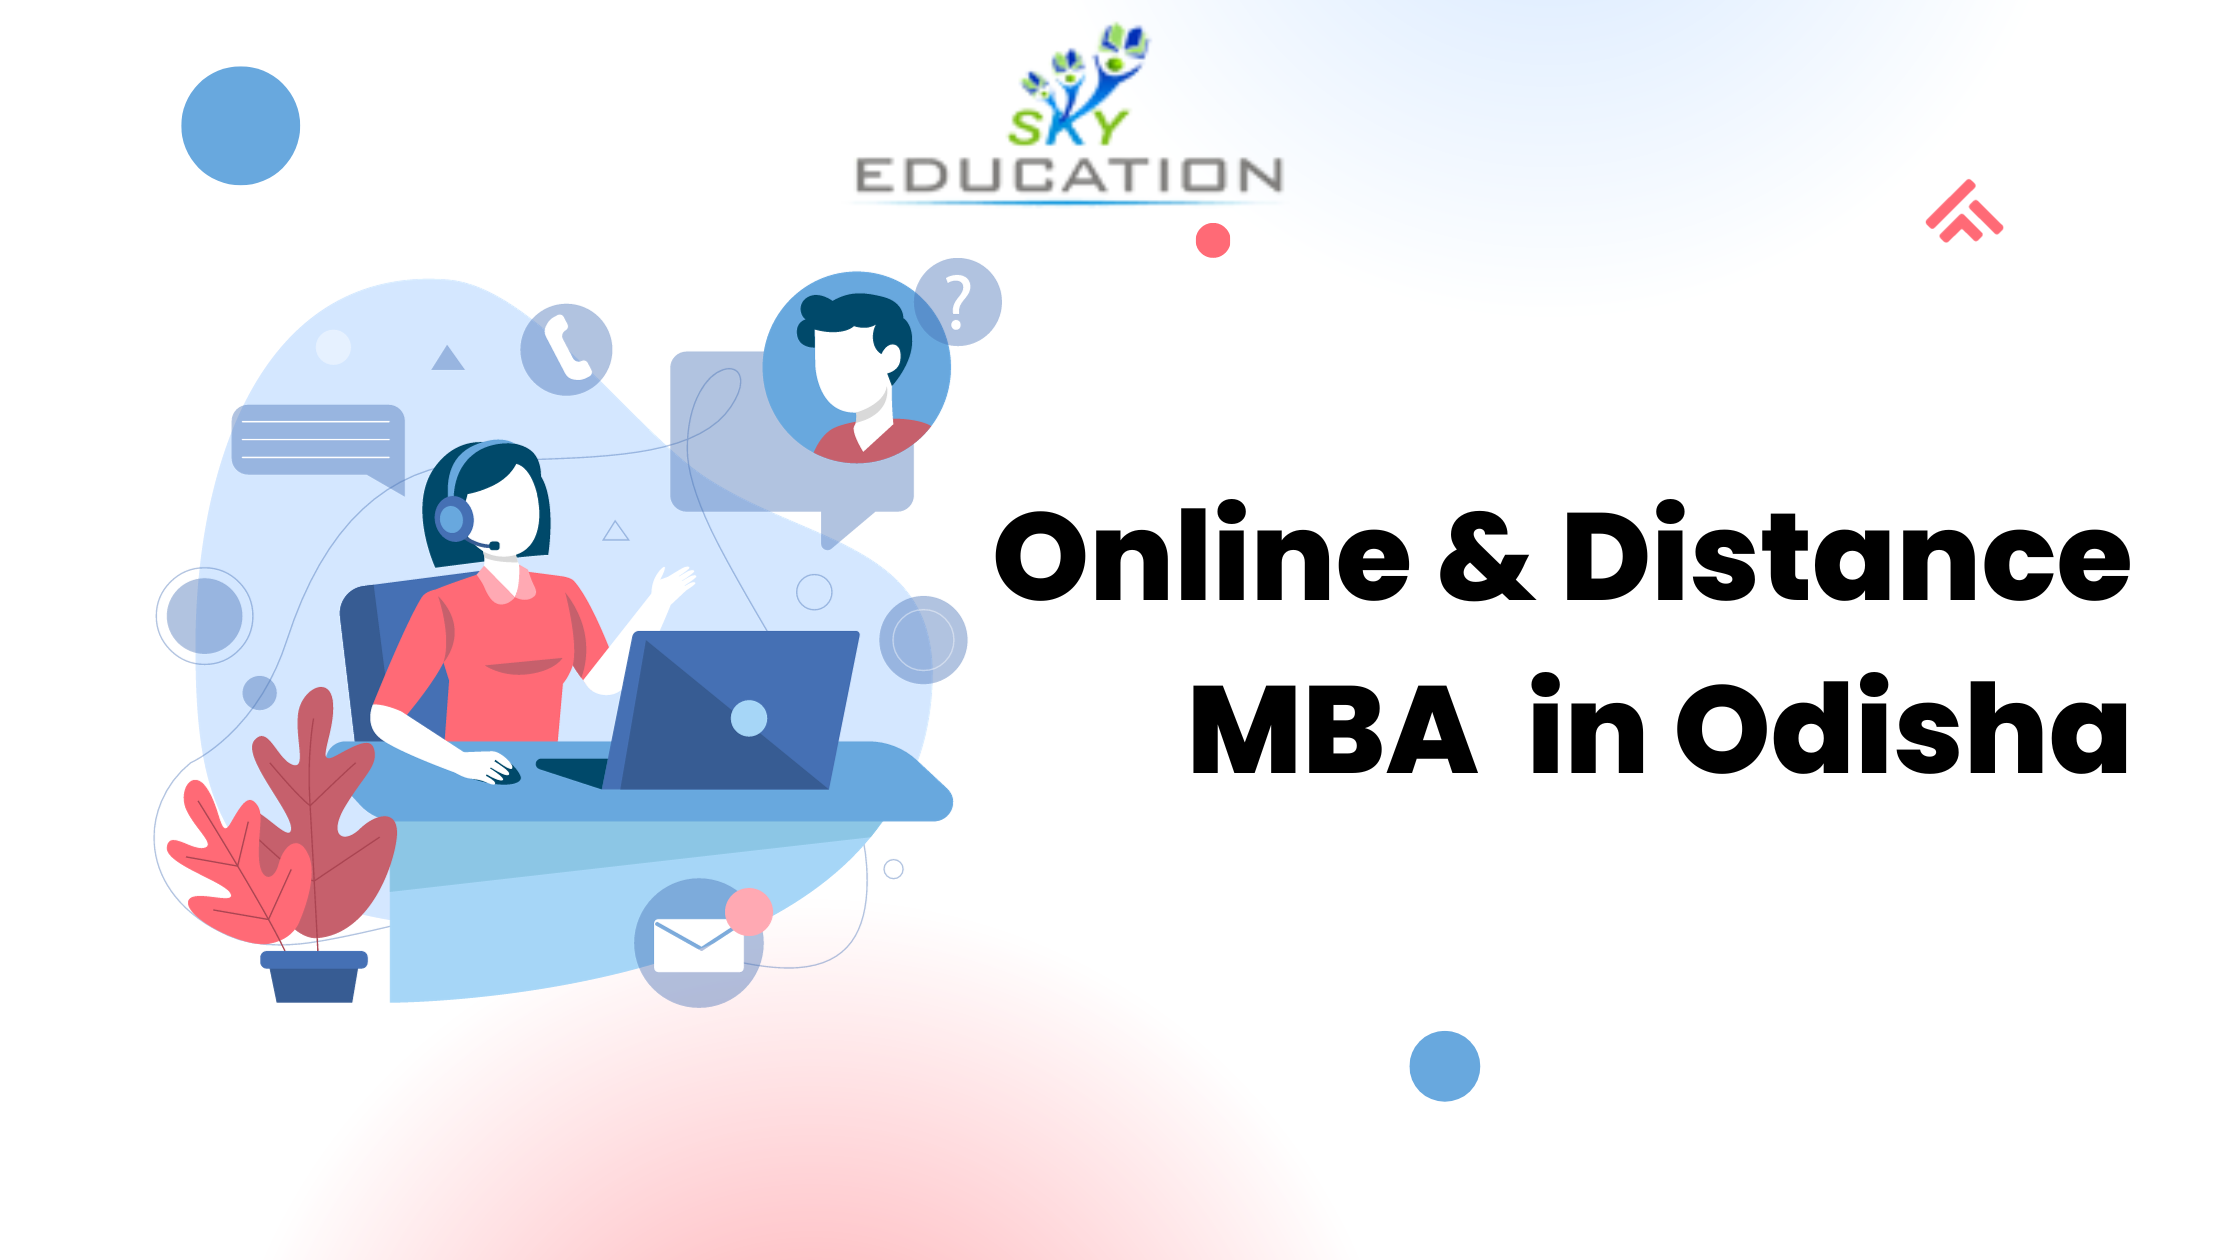 Unlocking Opportunities: Top Universities for Online & Distance MBA in Odisha 'photo